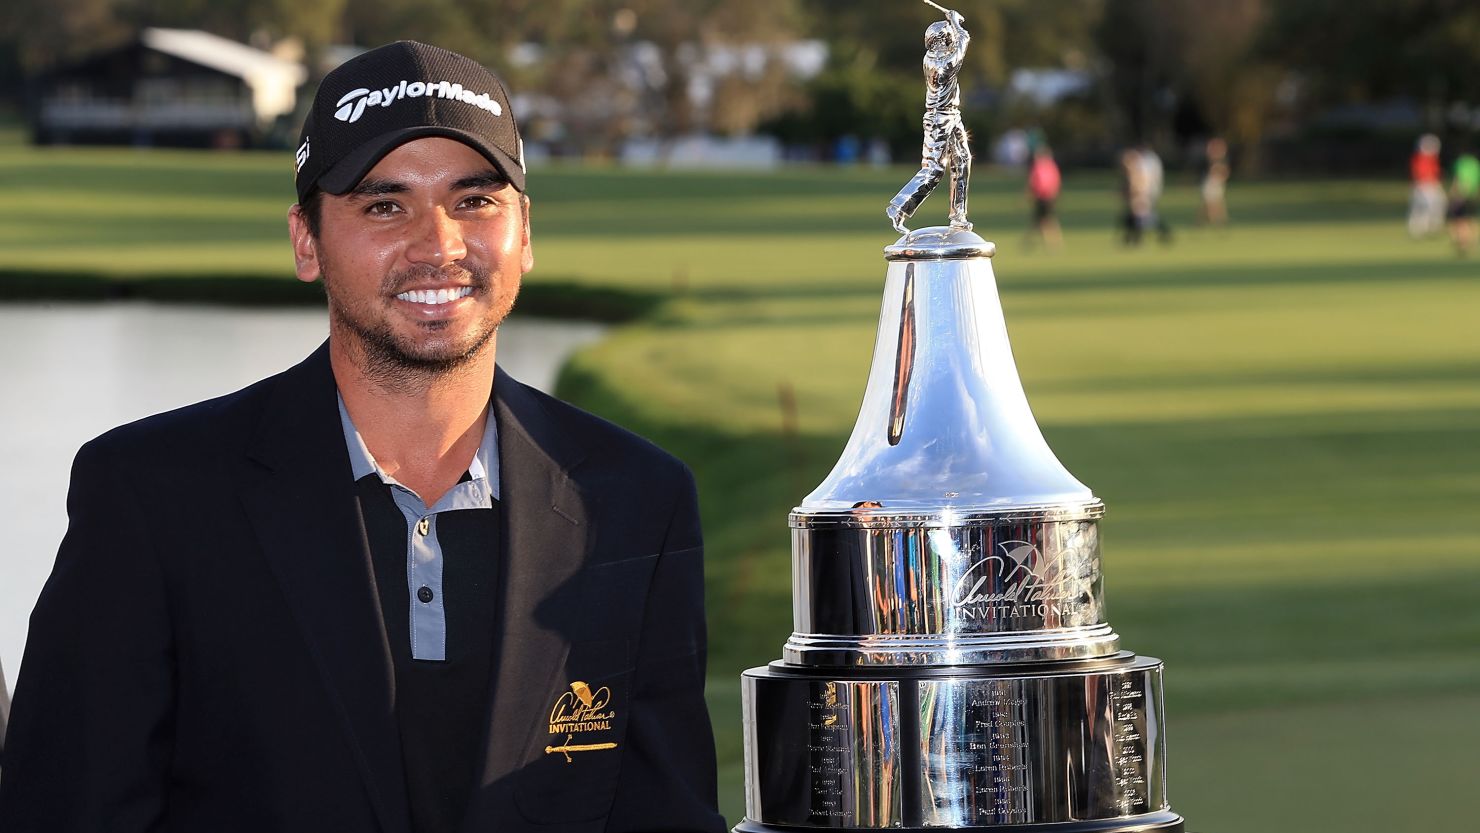 World No. 2 Jason Day says he has "idolized" Tiger Woods "since he was a kid."